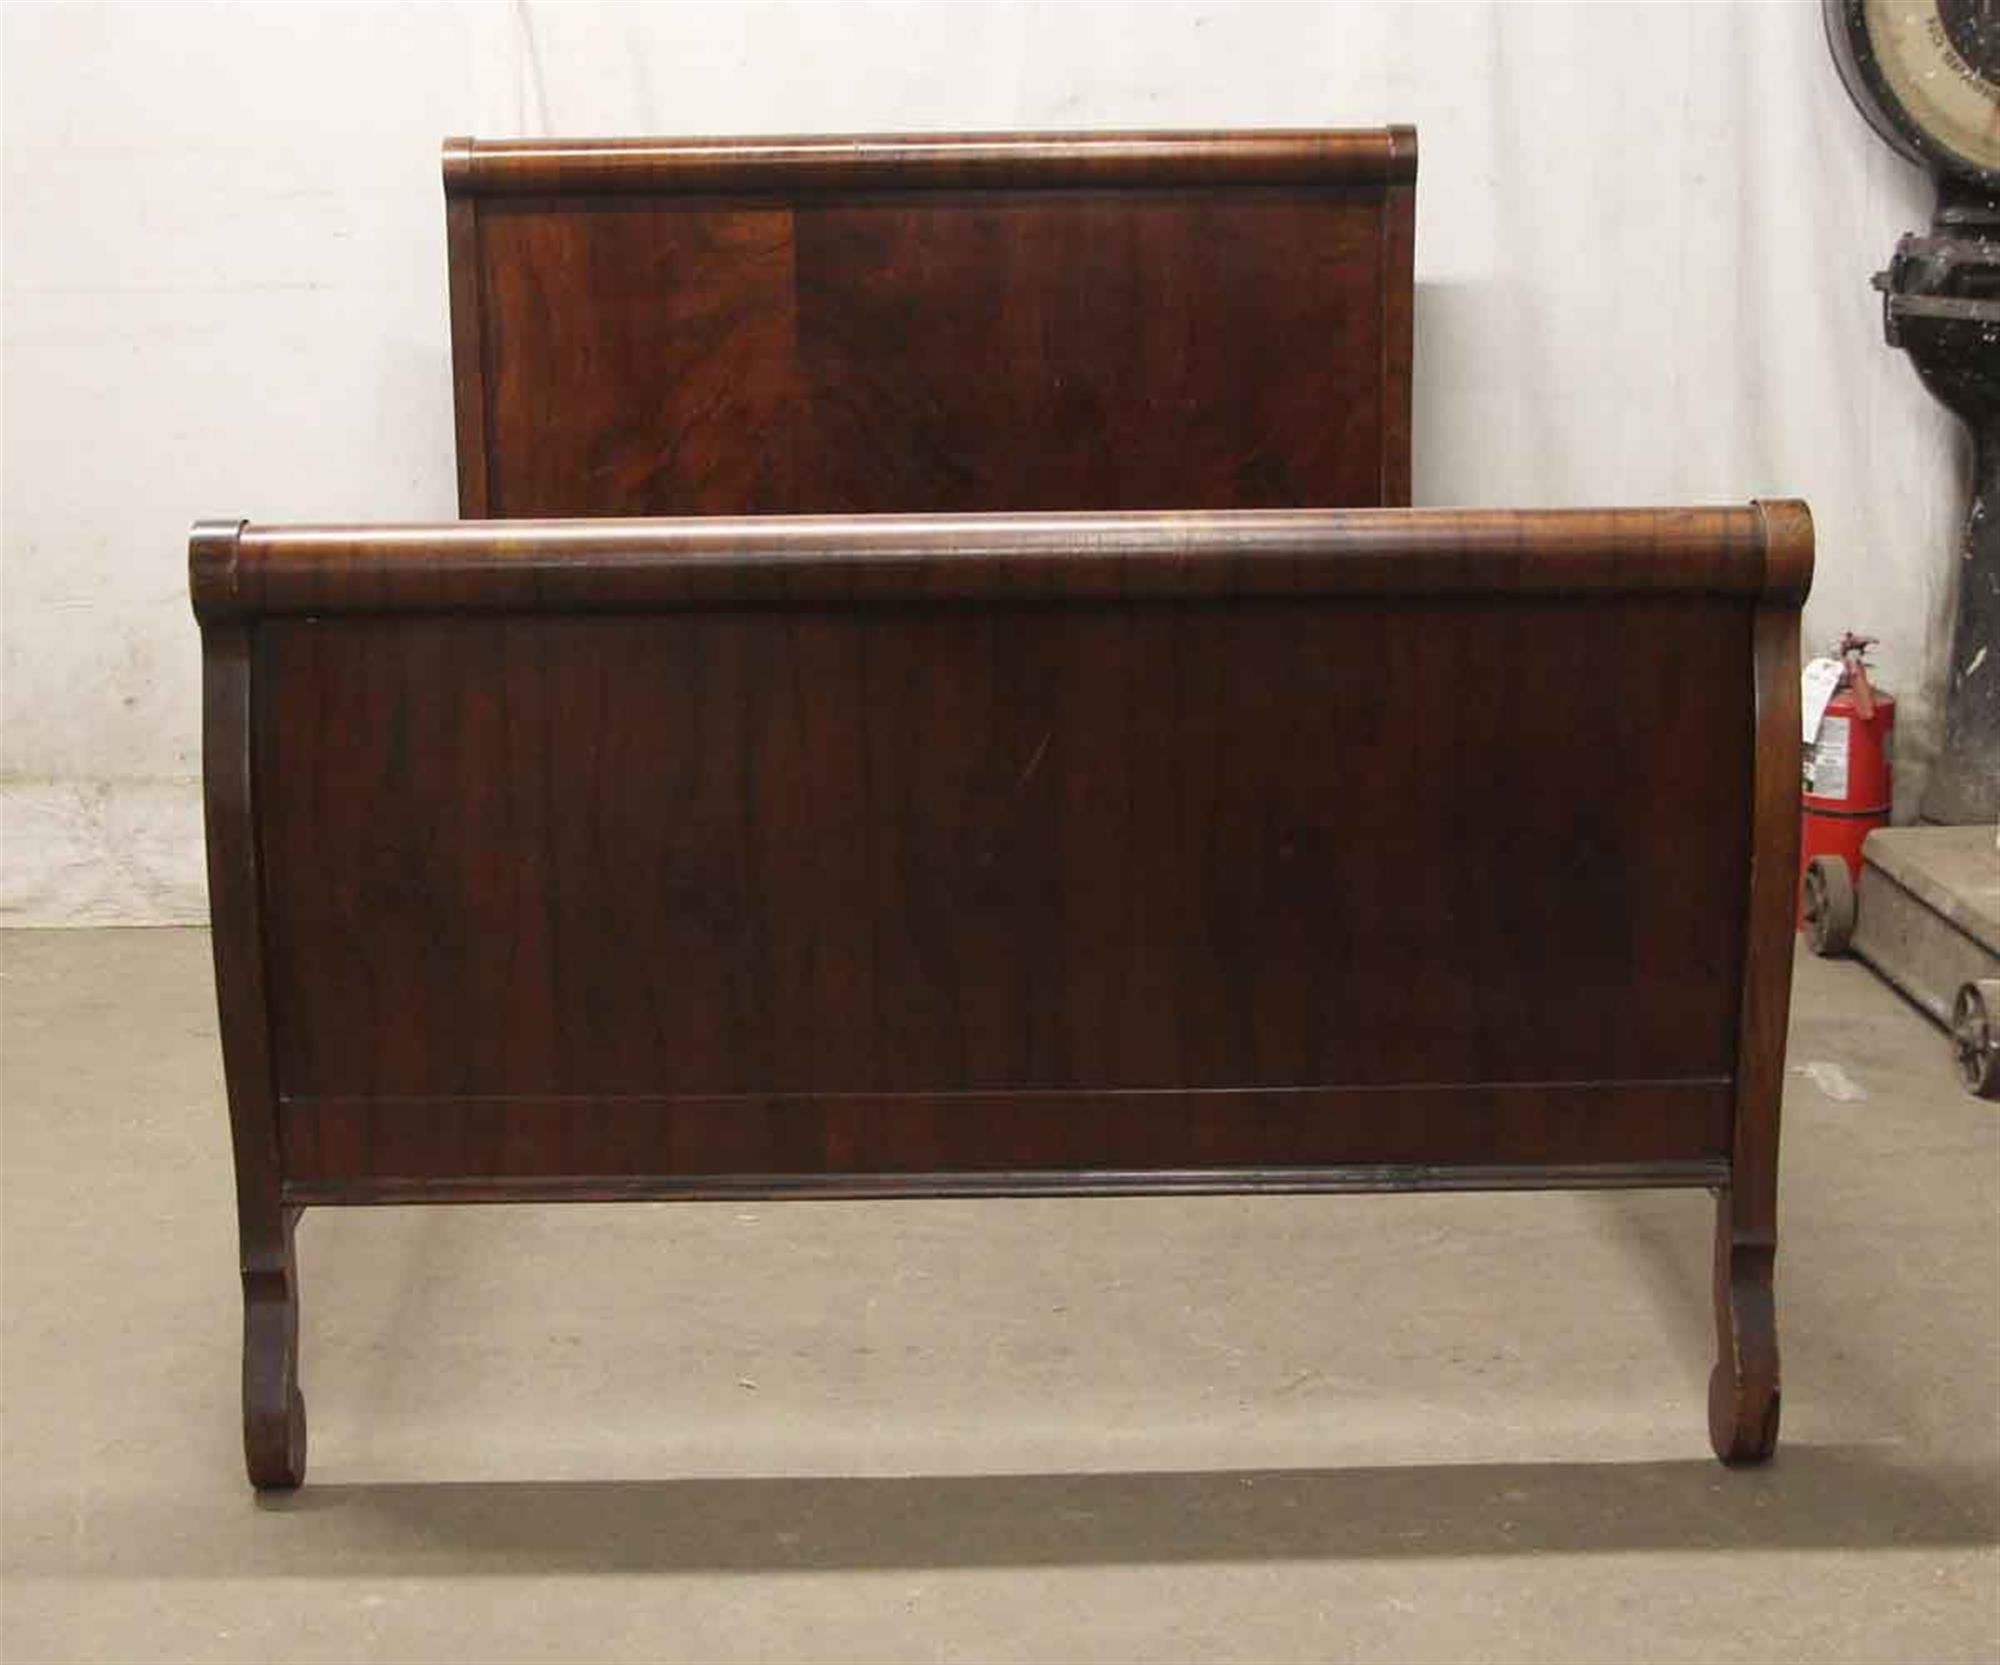 This bed frame is in the Craftsmen style and has a dark wooden tone. It is a full bed made of solid wood with a figured walnut veneer, circa 1920. This can be seen at our 400 Gilligan St location in Scranton, PA.